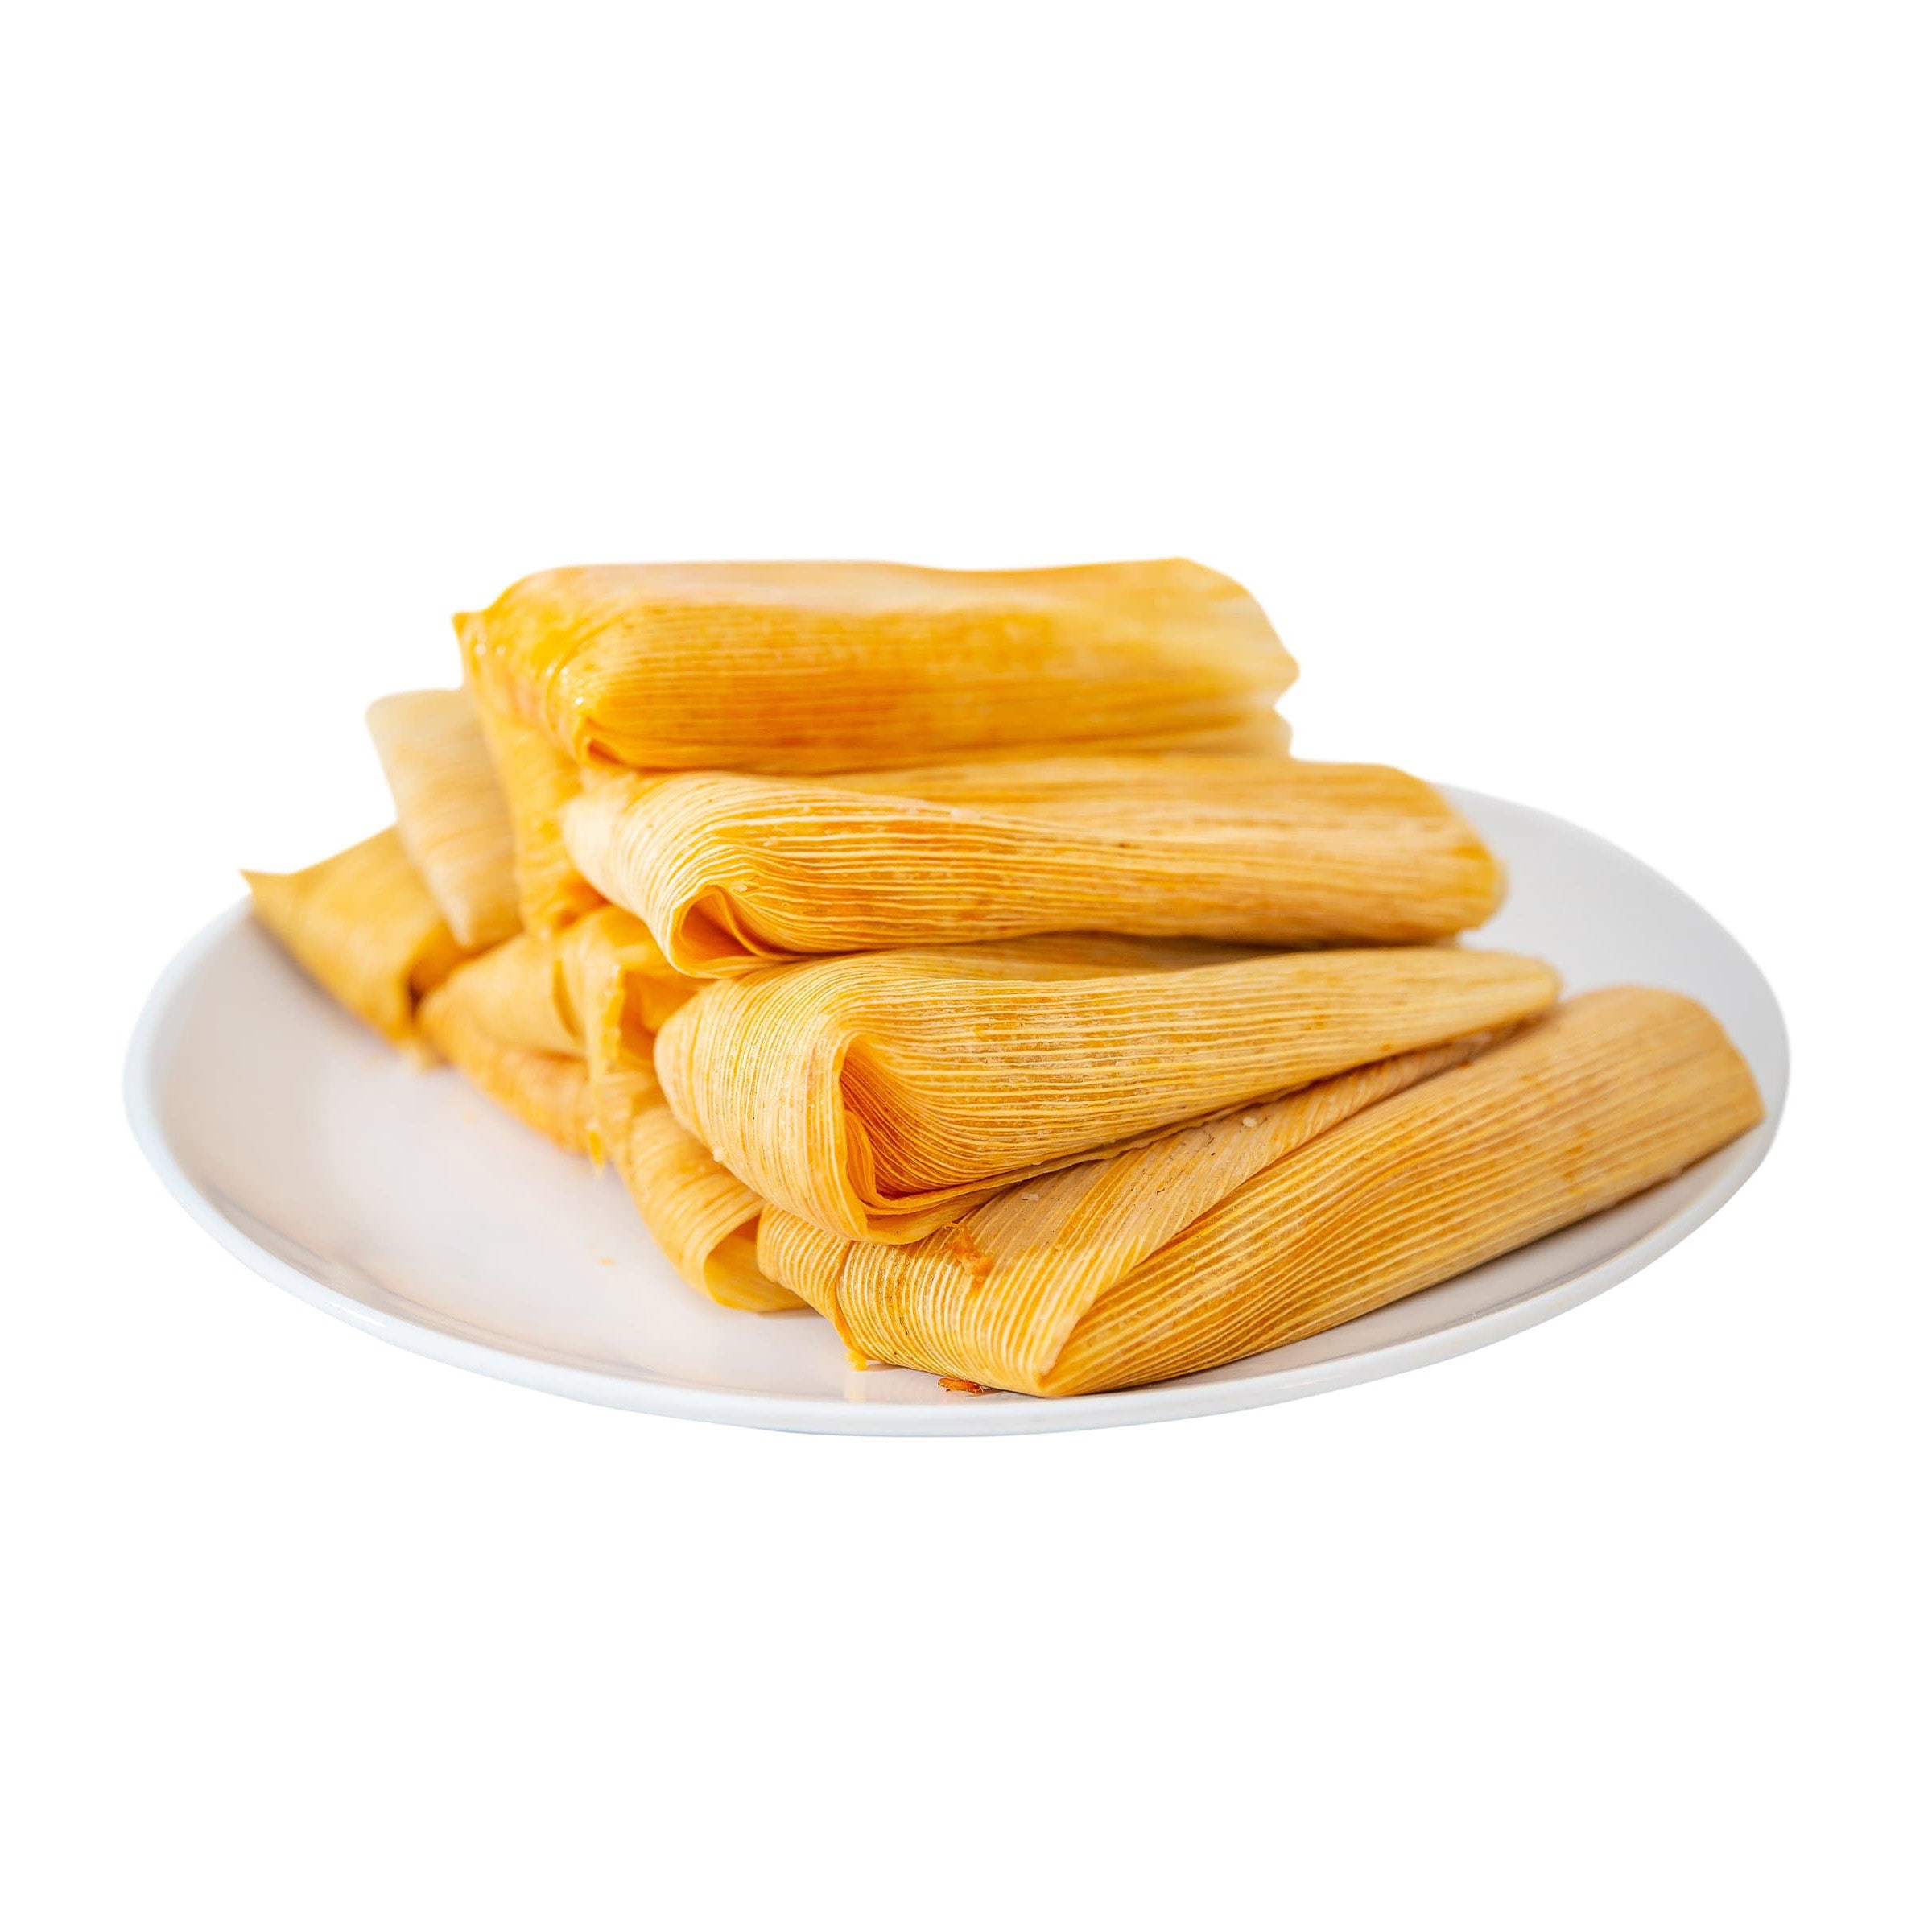 A stack of freshly made Hatch Green Chile Chicken Tamales on a white plate, isolated on a white background. The tamales are wrapped in yellow corn husks and feature the distinctive flavor of Hatch.